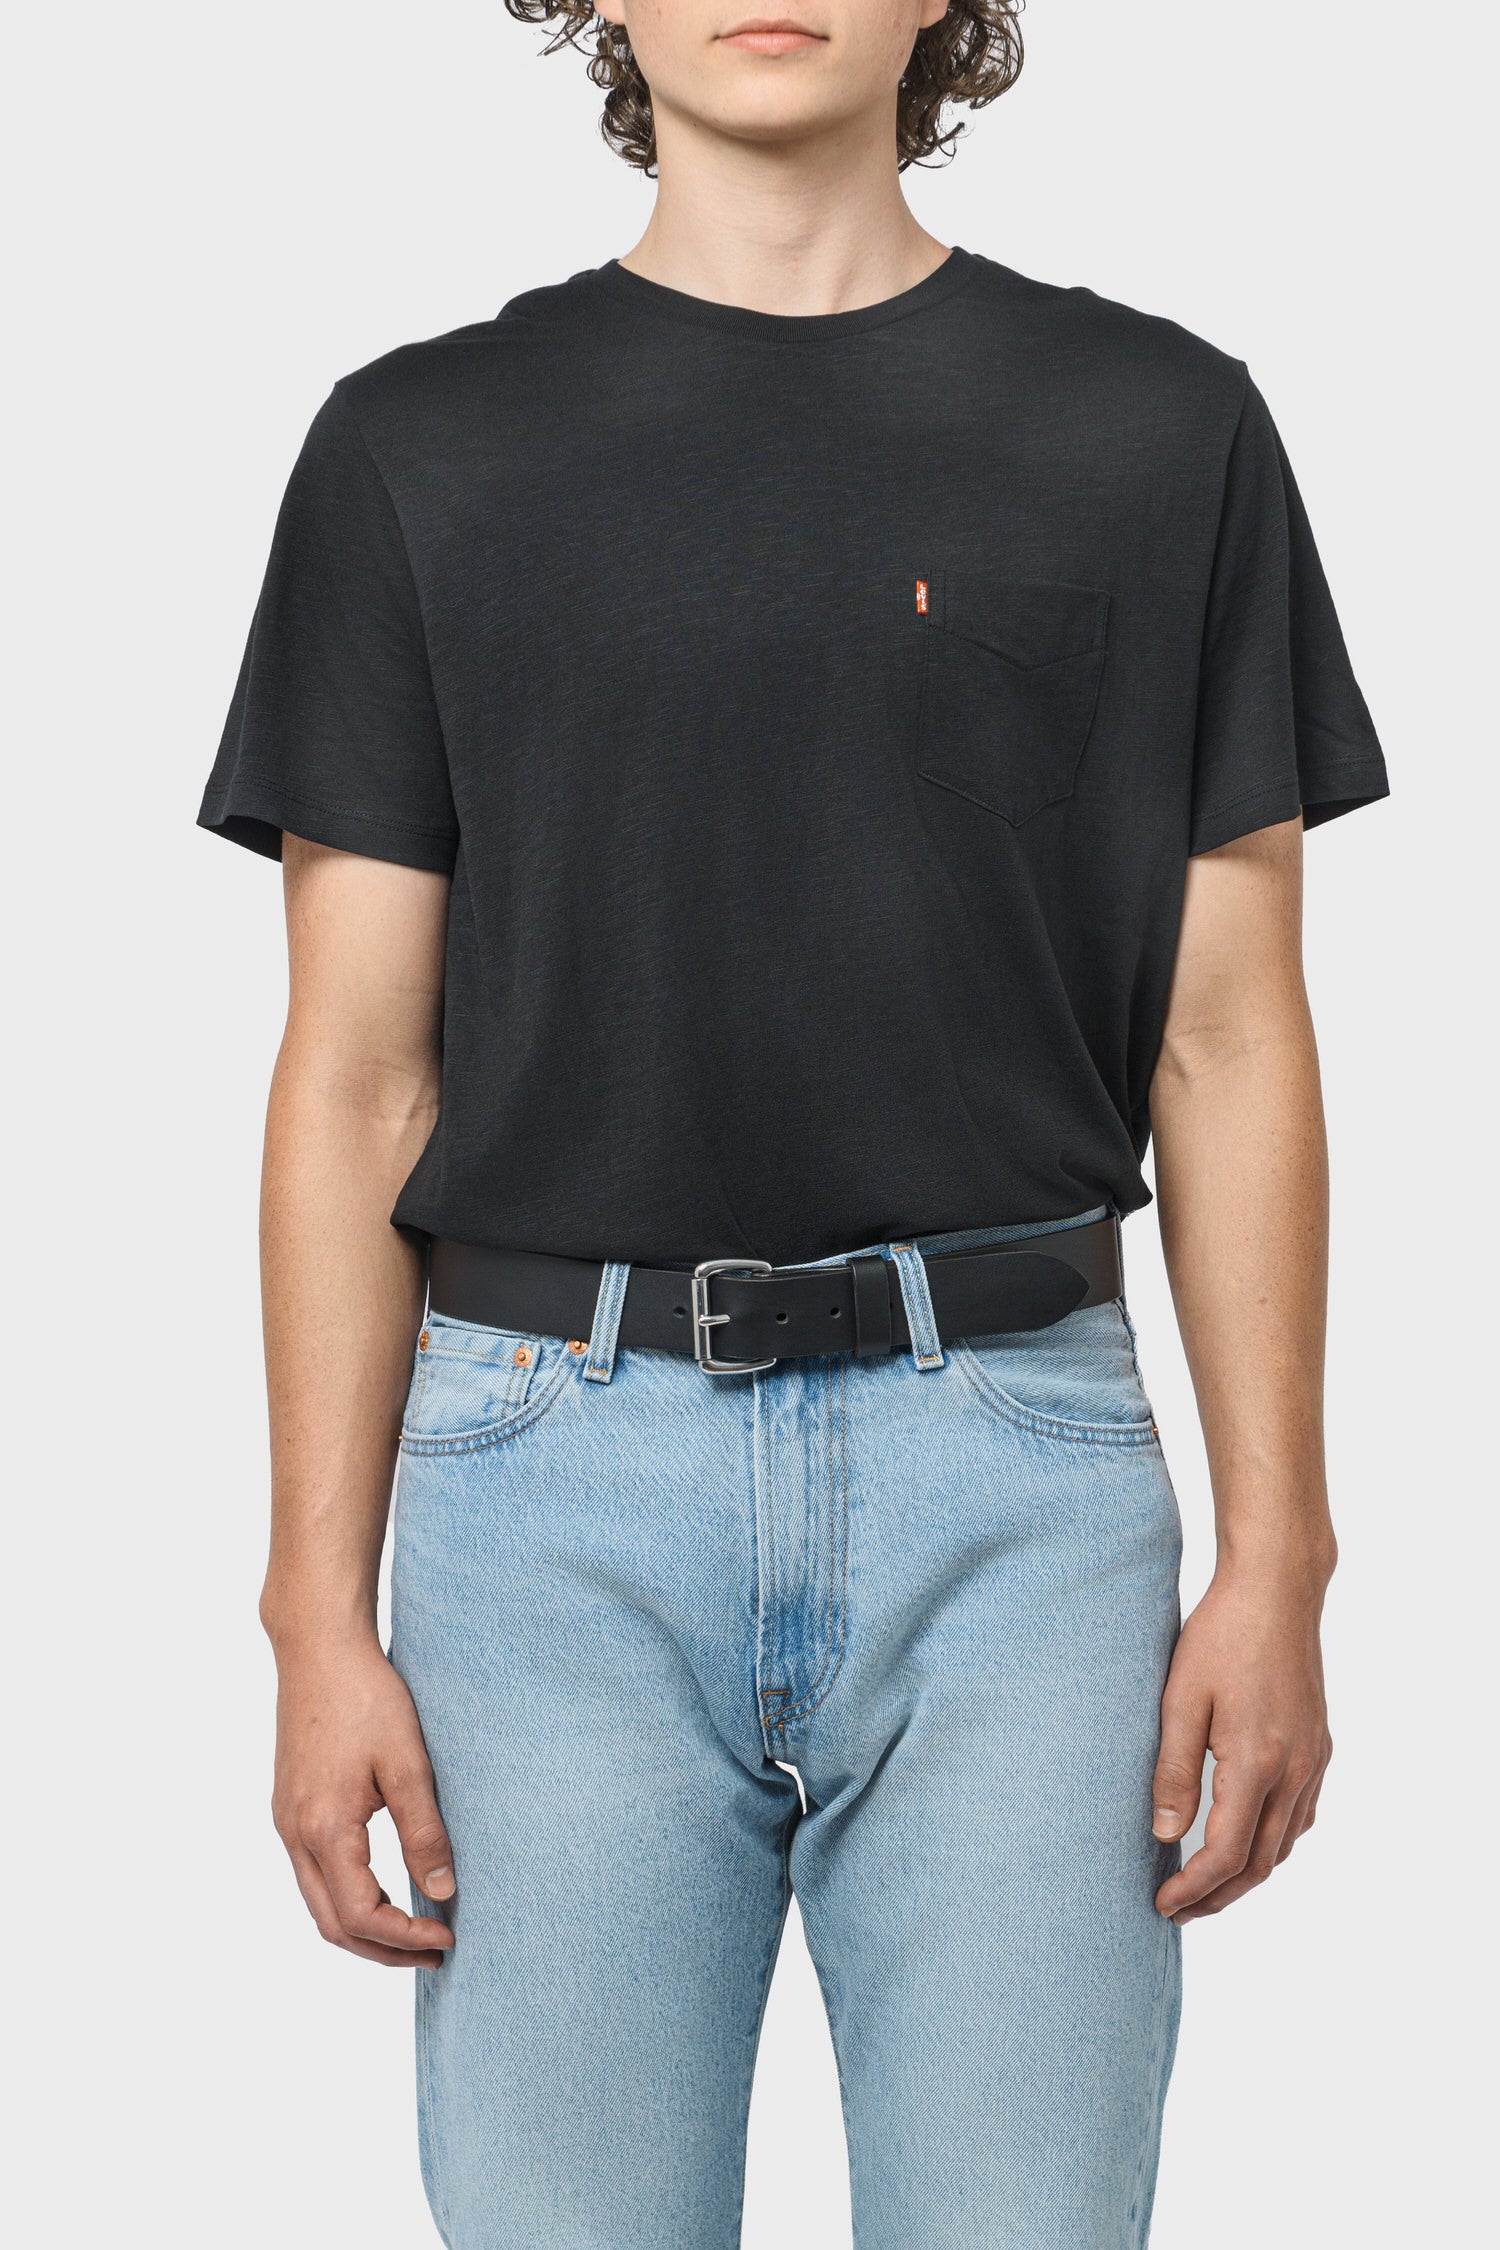 Men's Levi's SS Classic Pocket Tee in Mineral Black